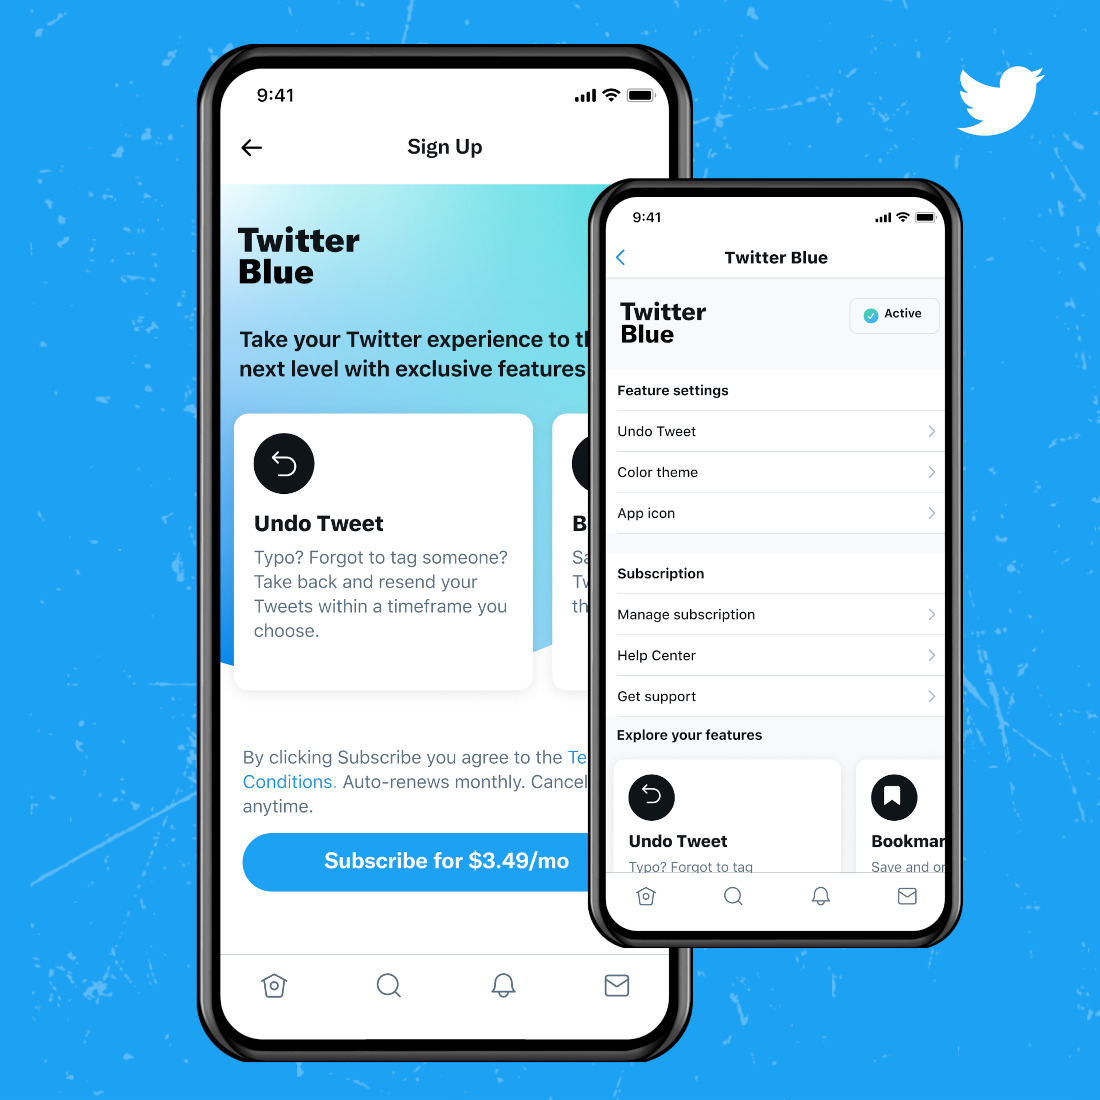 Twitter Blue introduces Labs feature with two new experimental features